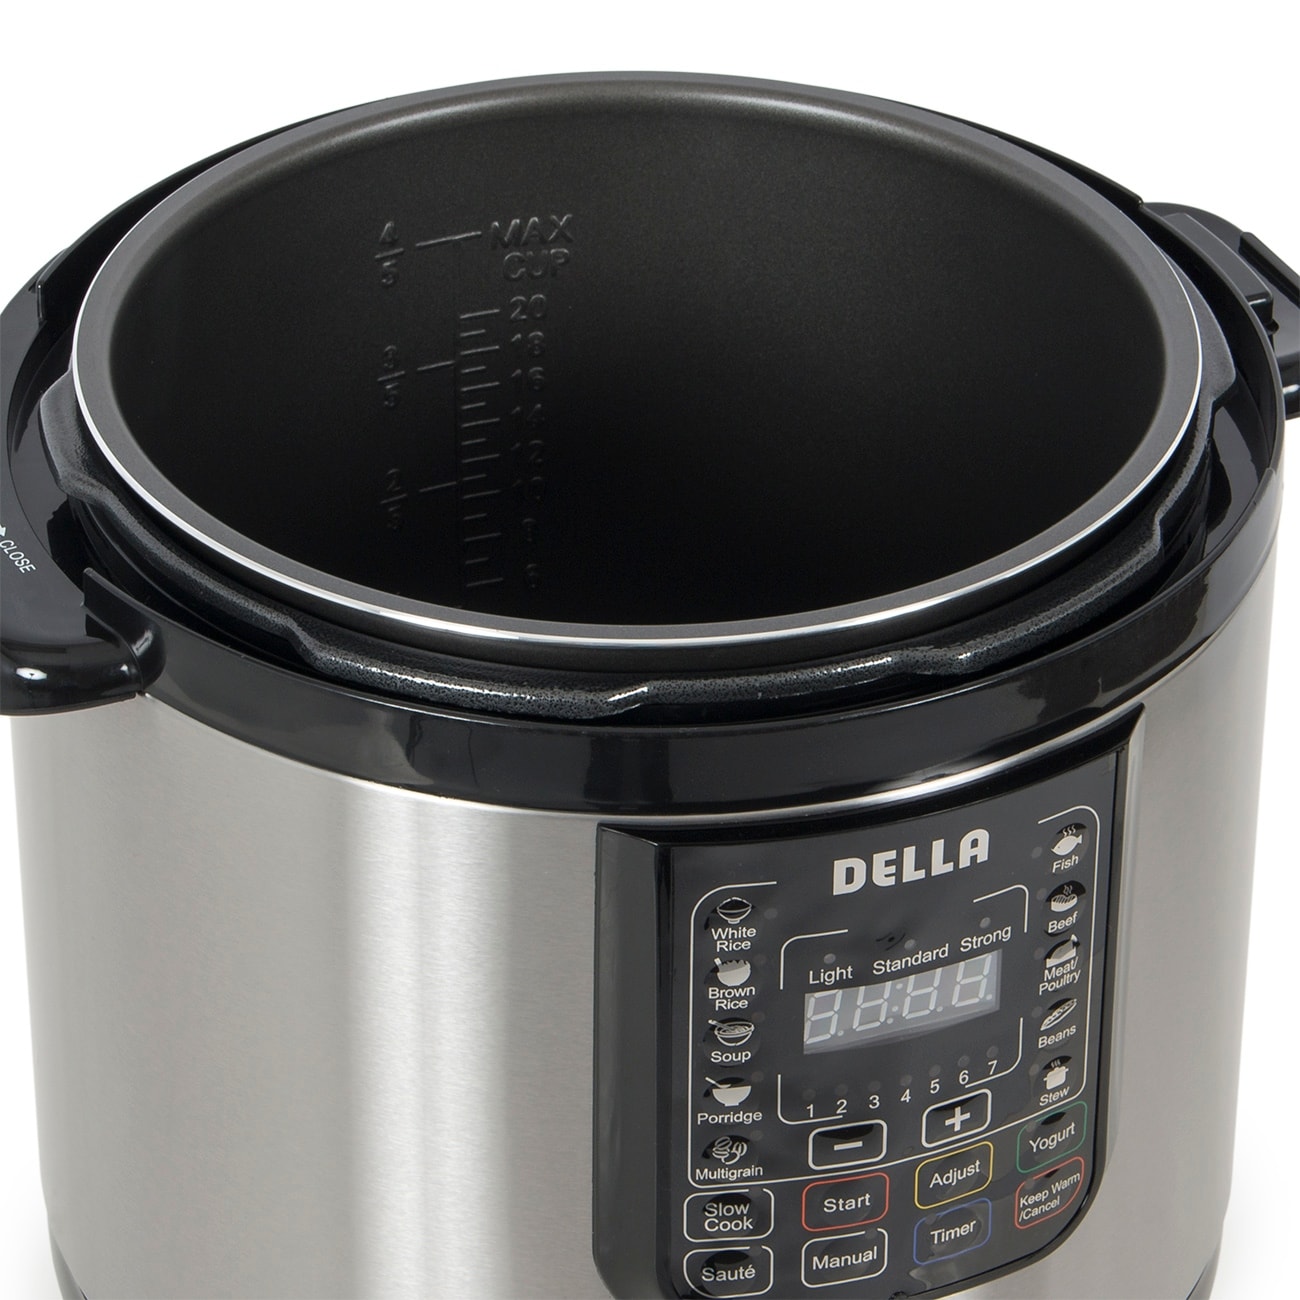 https://ak1.ostkcdn.com/images/products/is/images/direct/a32f6edac40ba089f220e105bdc7ffbe7063cf94/Della-10-in-1-Multi-Function-Electric-Pressure-Cooker-Stainless-Steel%2C-Programmable-10-QT.jpg